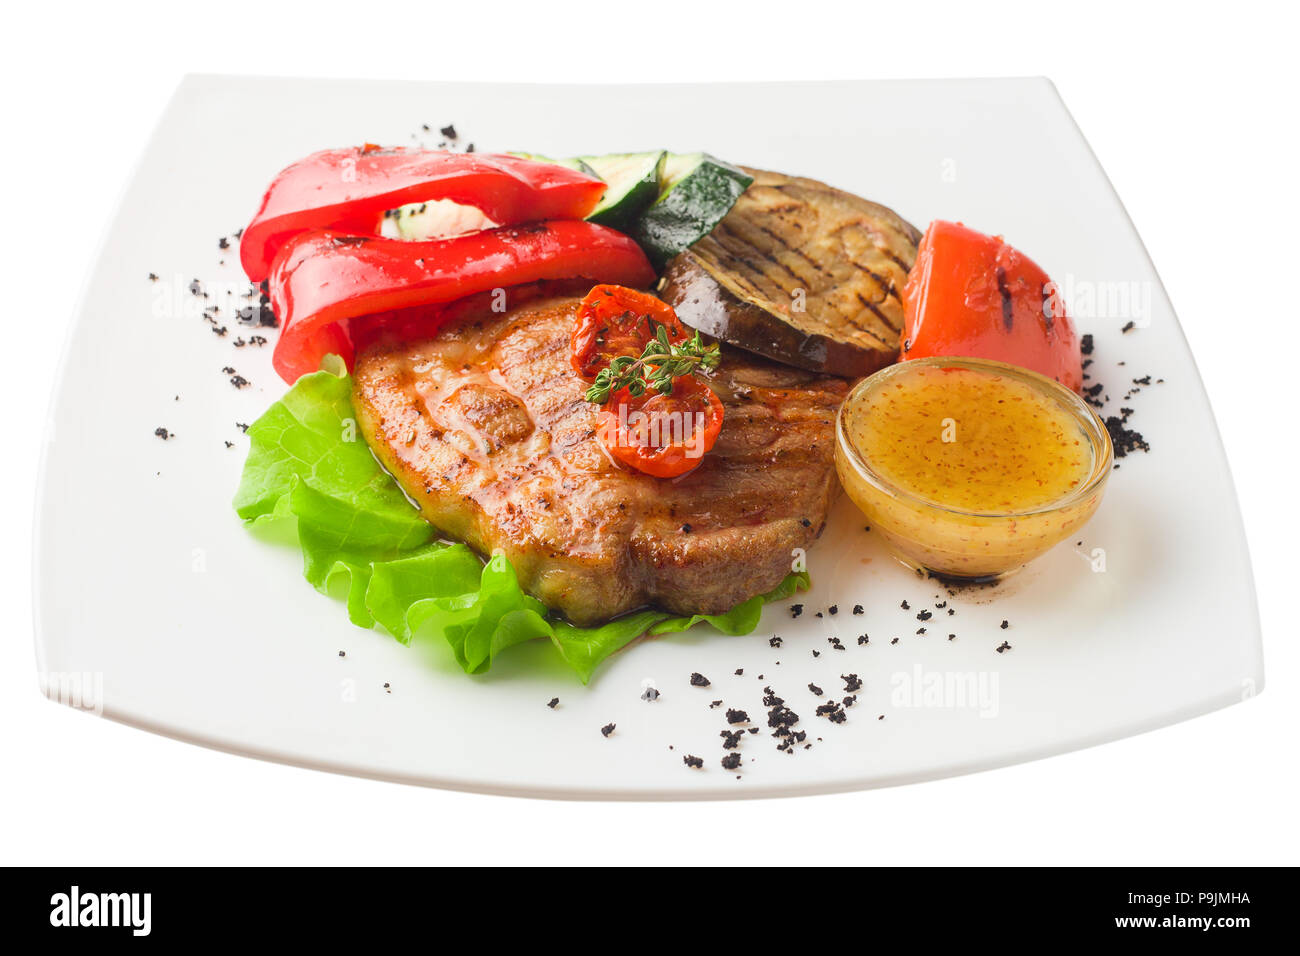 juicy grilled pork with vegetables on a white background, isolat Stock Photo